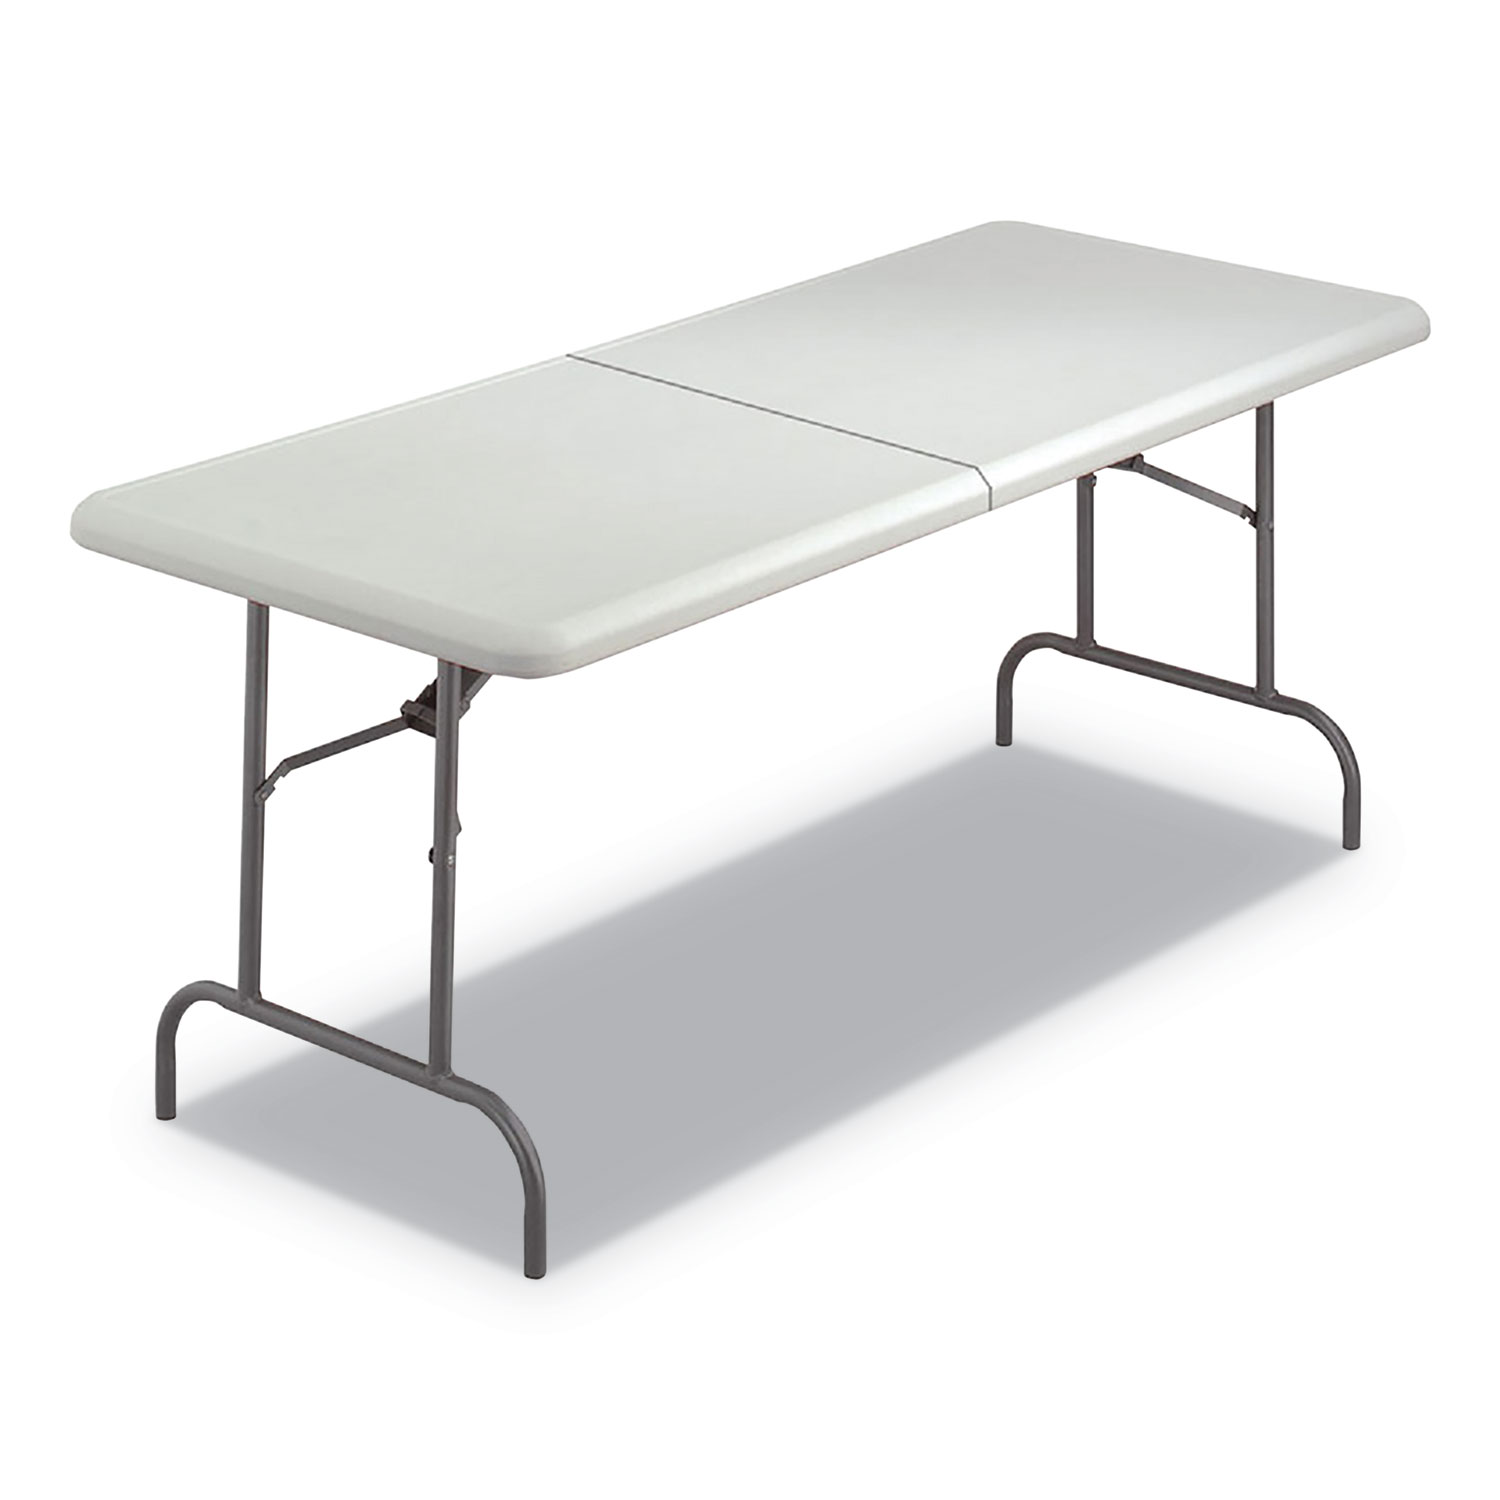  Iceberg 65463 IndestrucTables Too 1200 Series Folding Table, 30w x 72d x 29h, Platinum (ICE65463) 